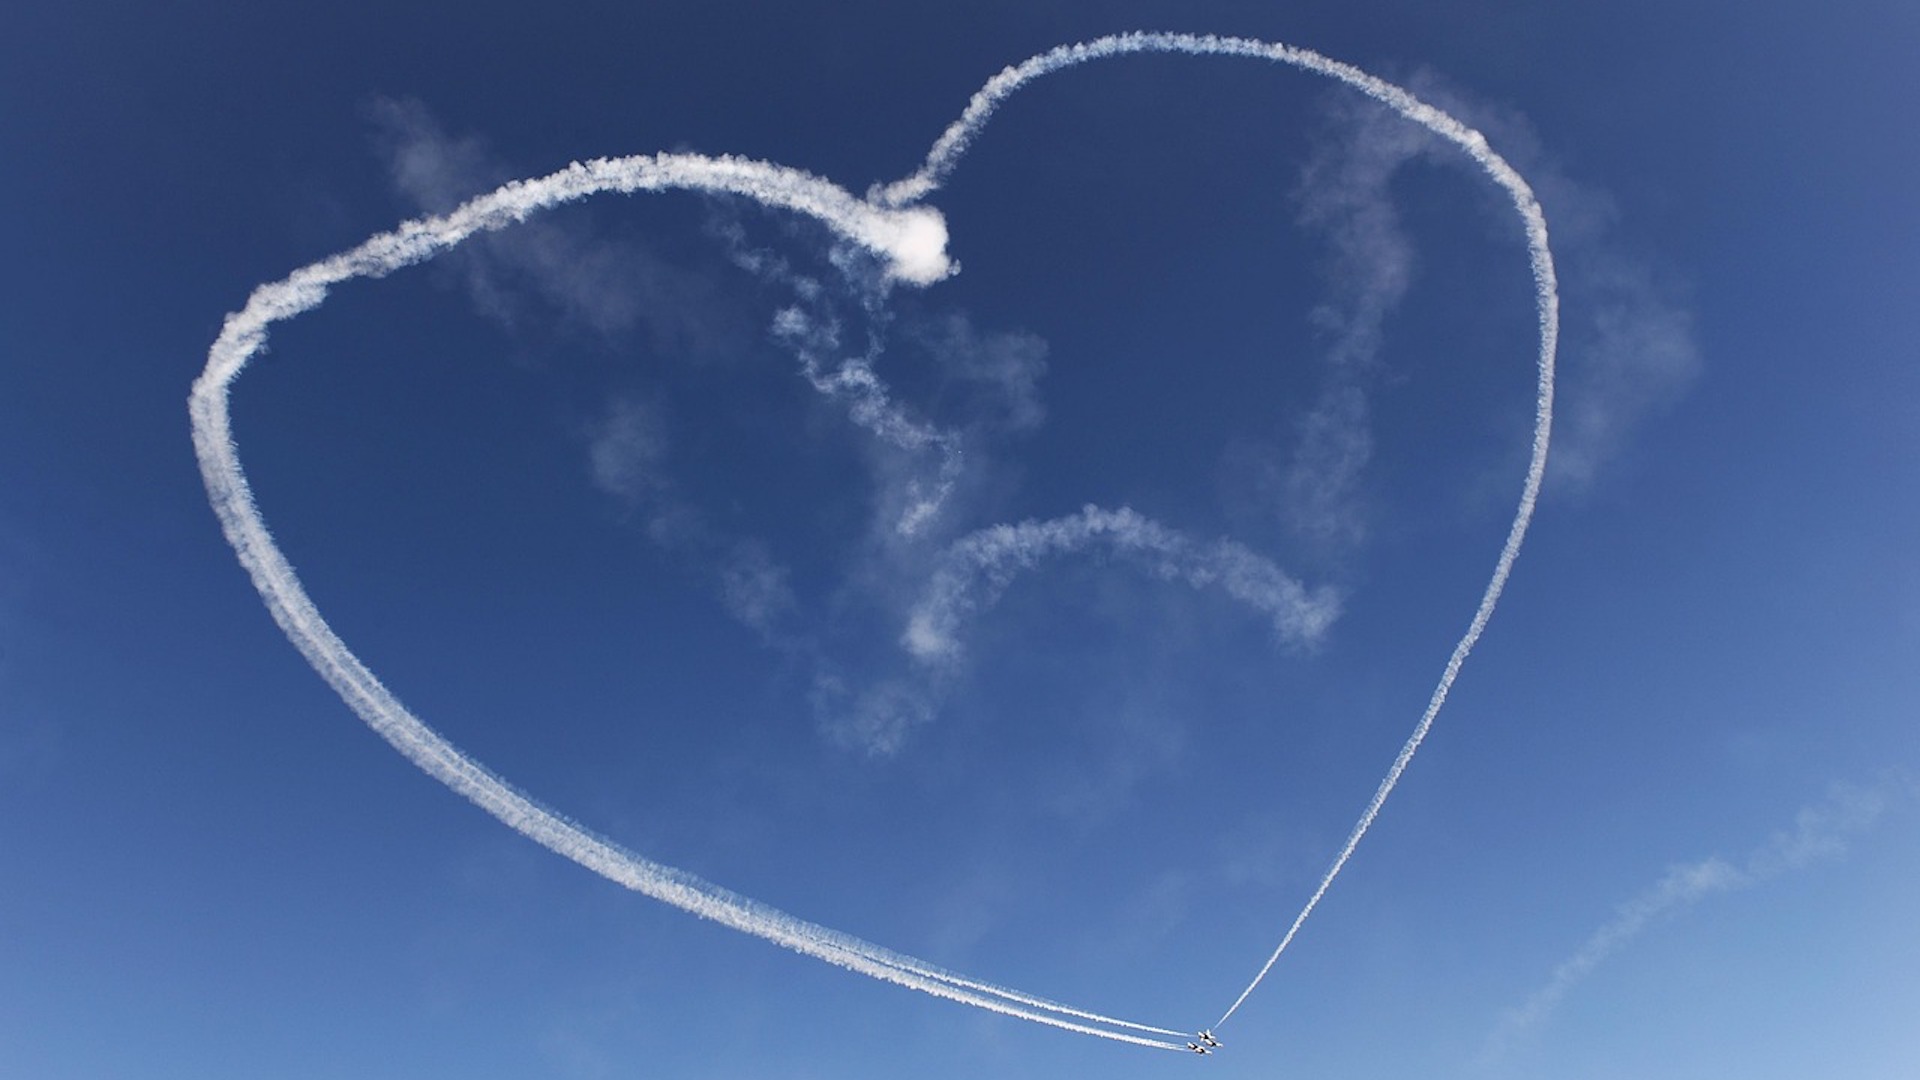 Stunt planes drawing a heart in the sky